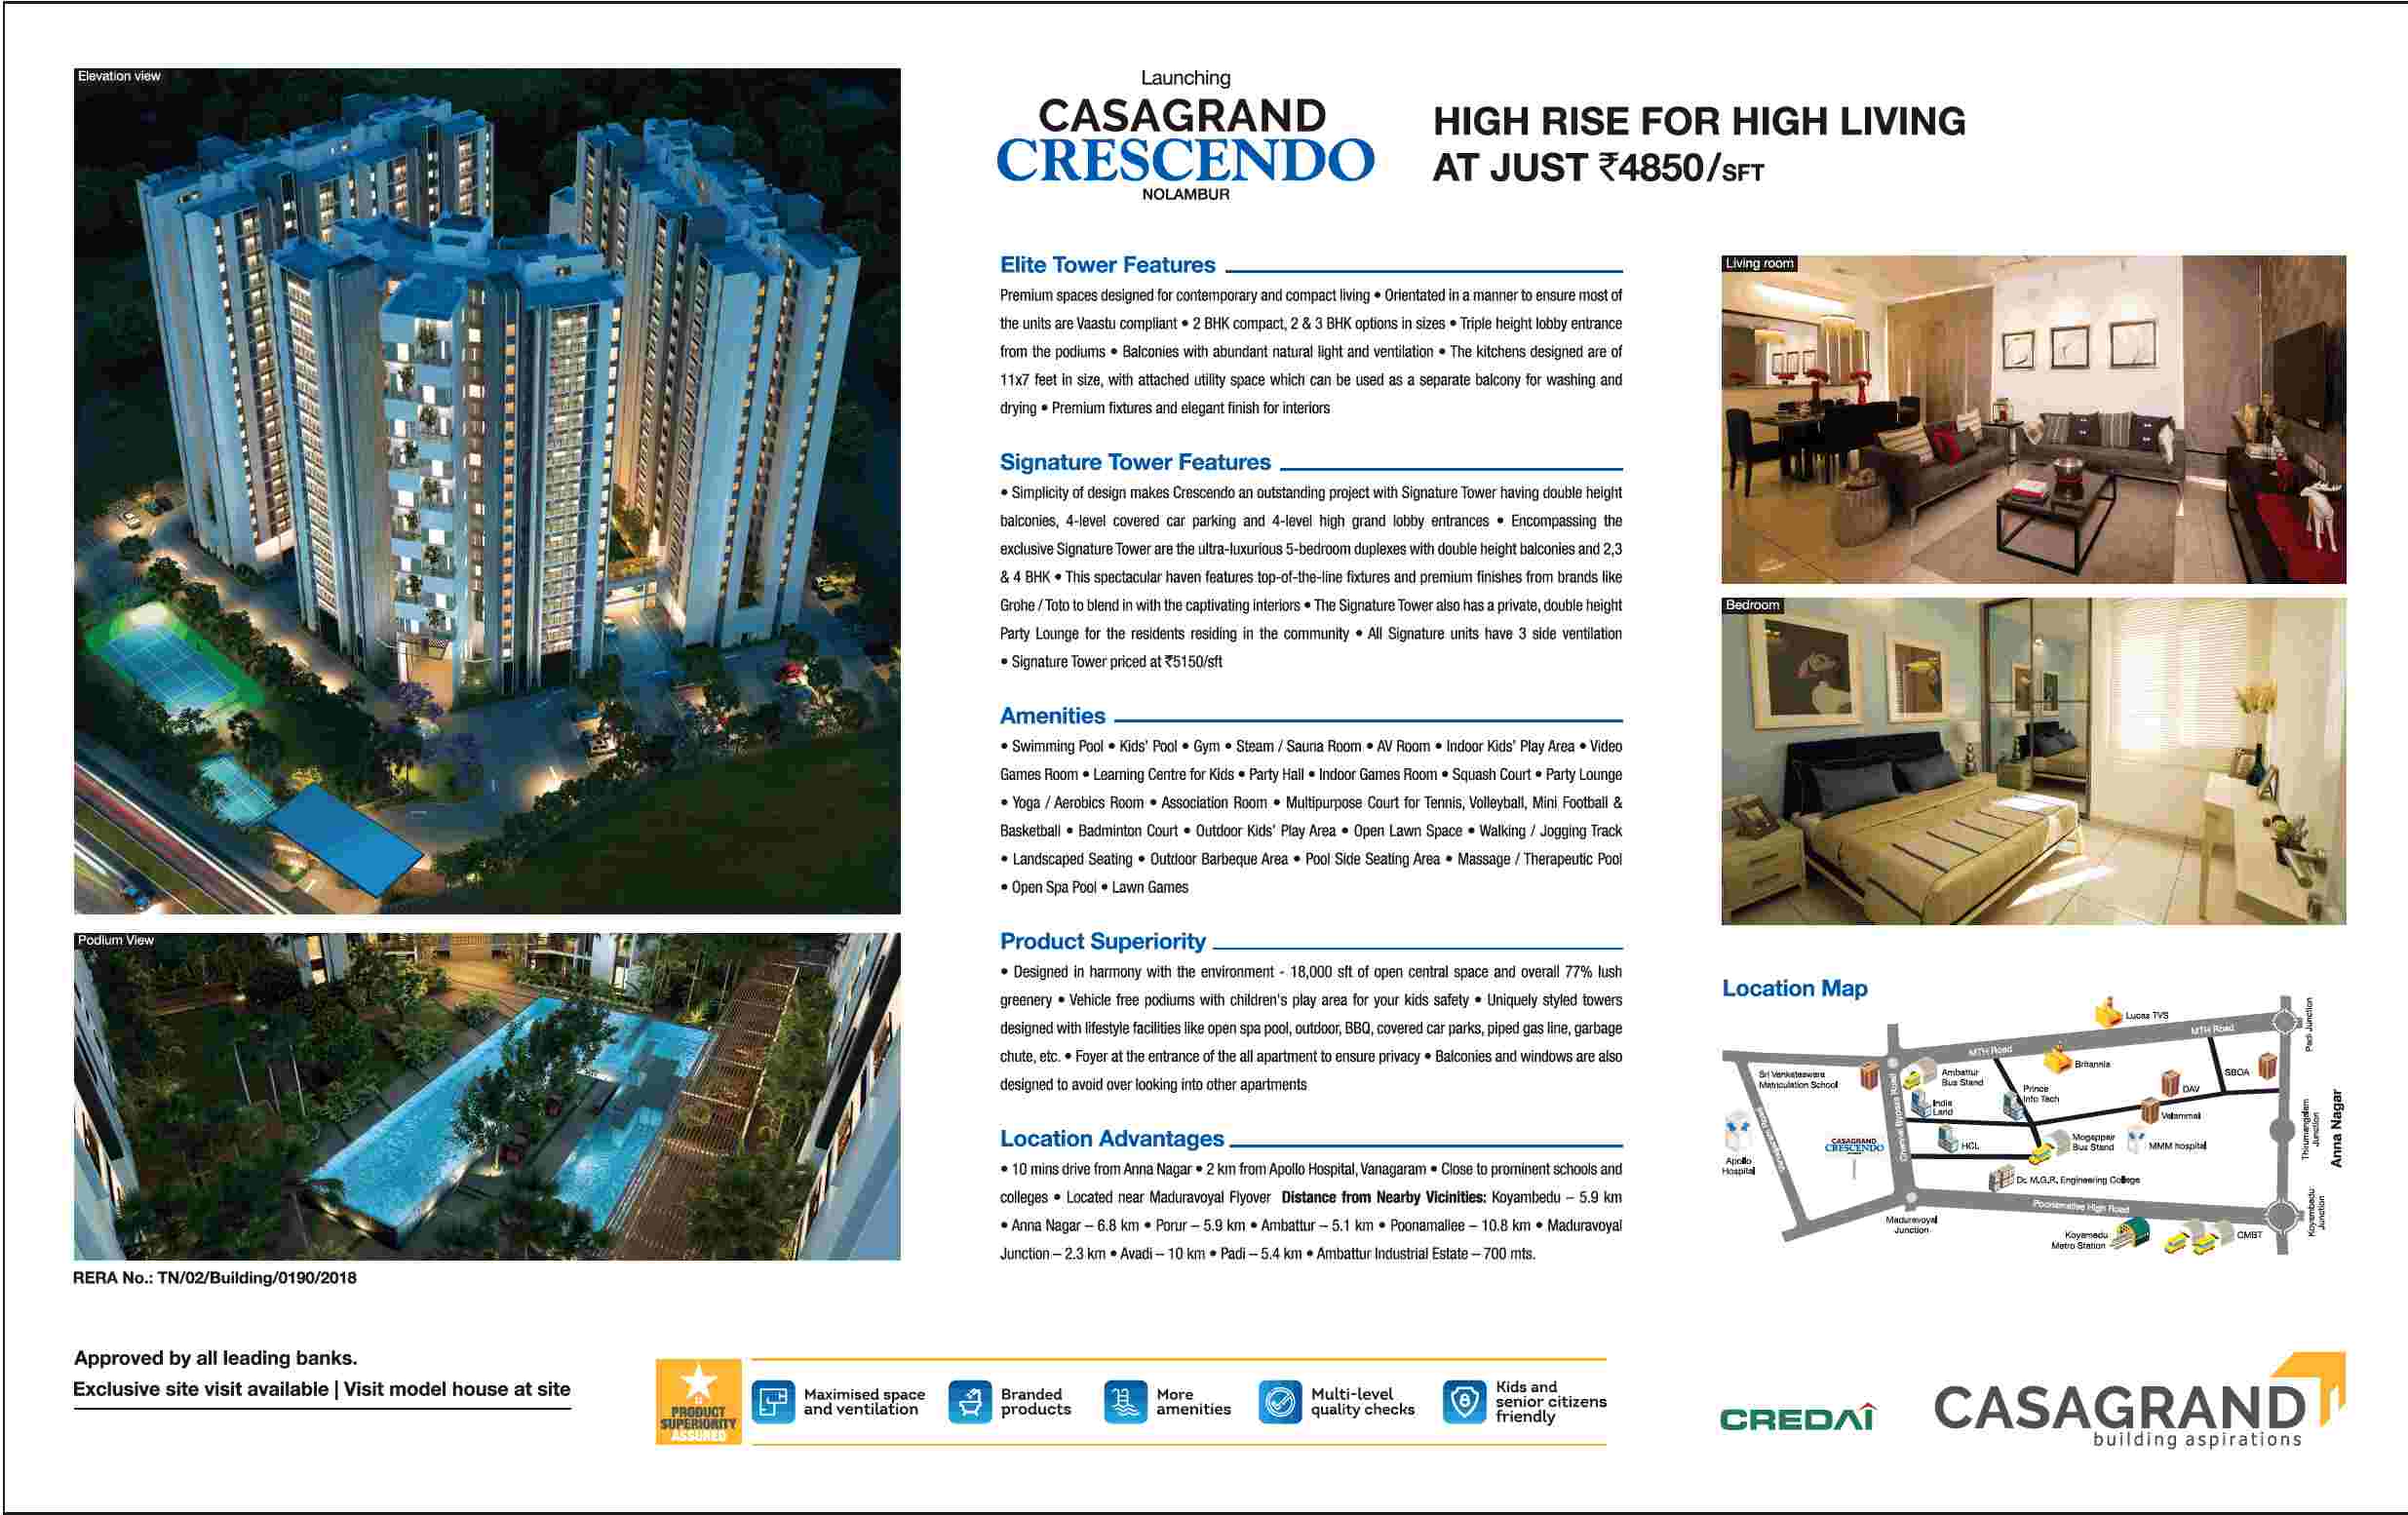 High rise for high living at just Rs. 4850 per sq.ft. at Casagrand Crescendo in Chennai Update